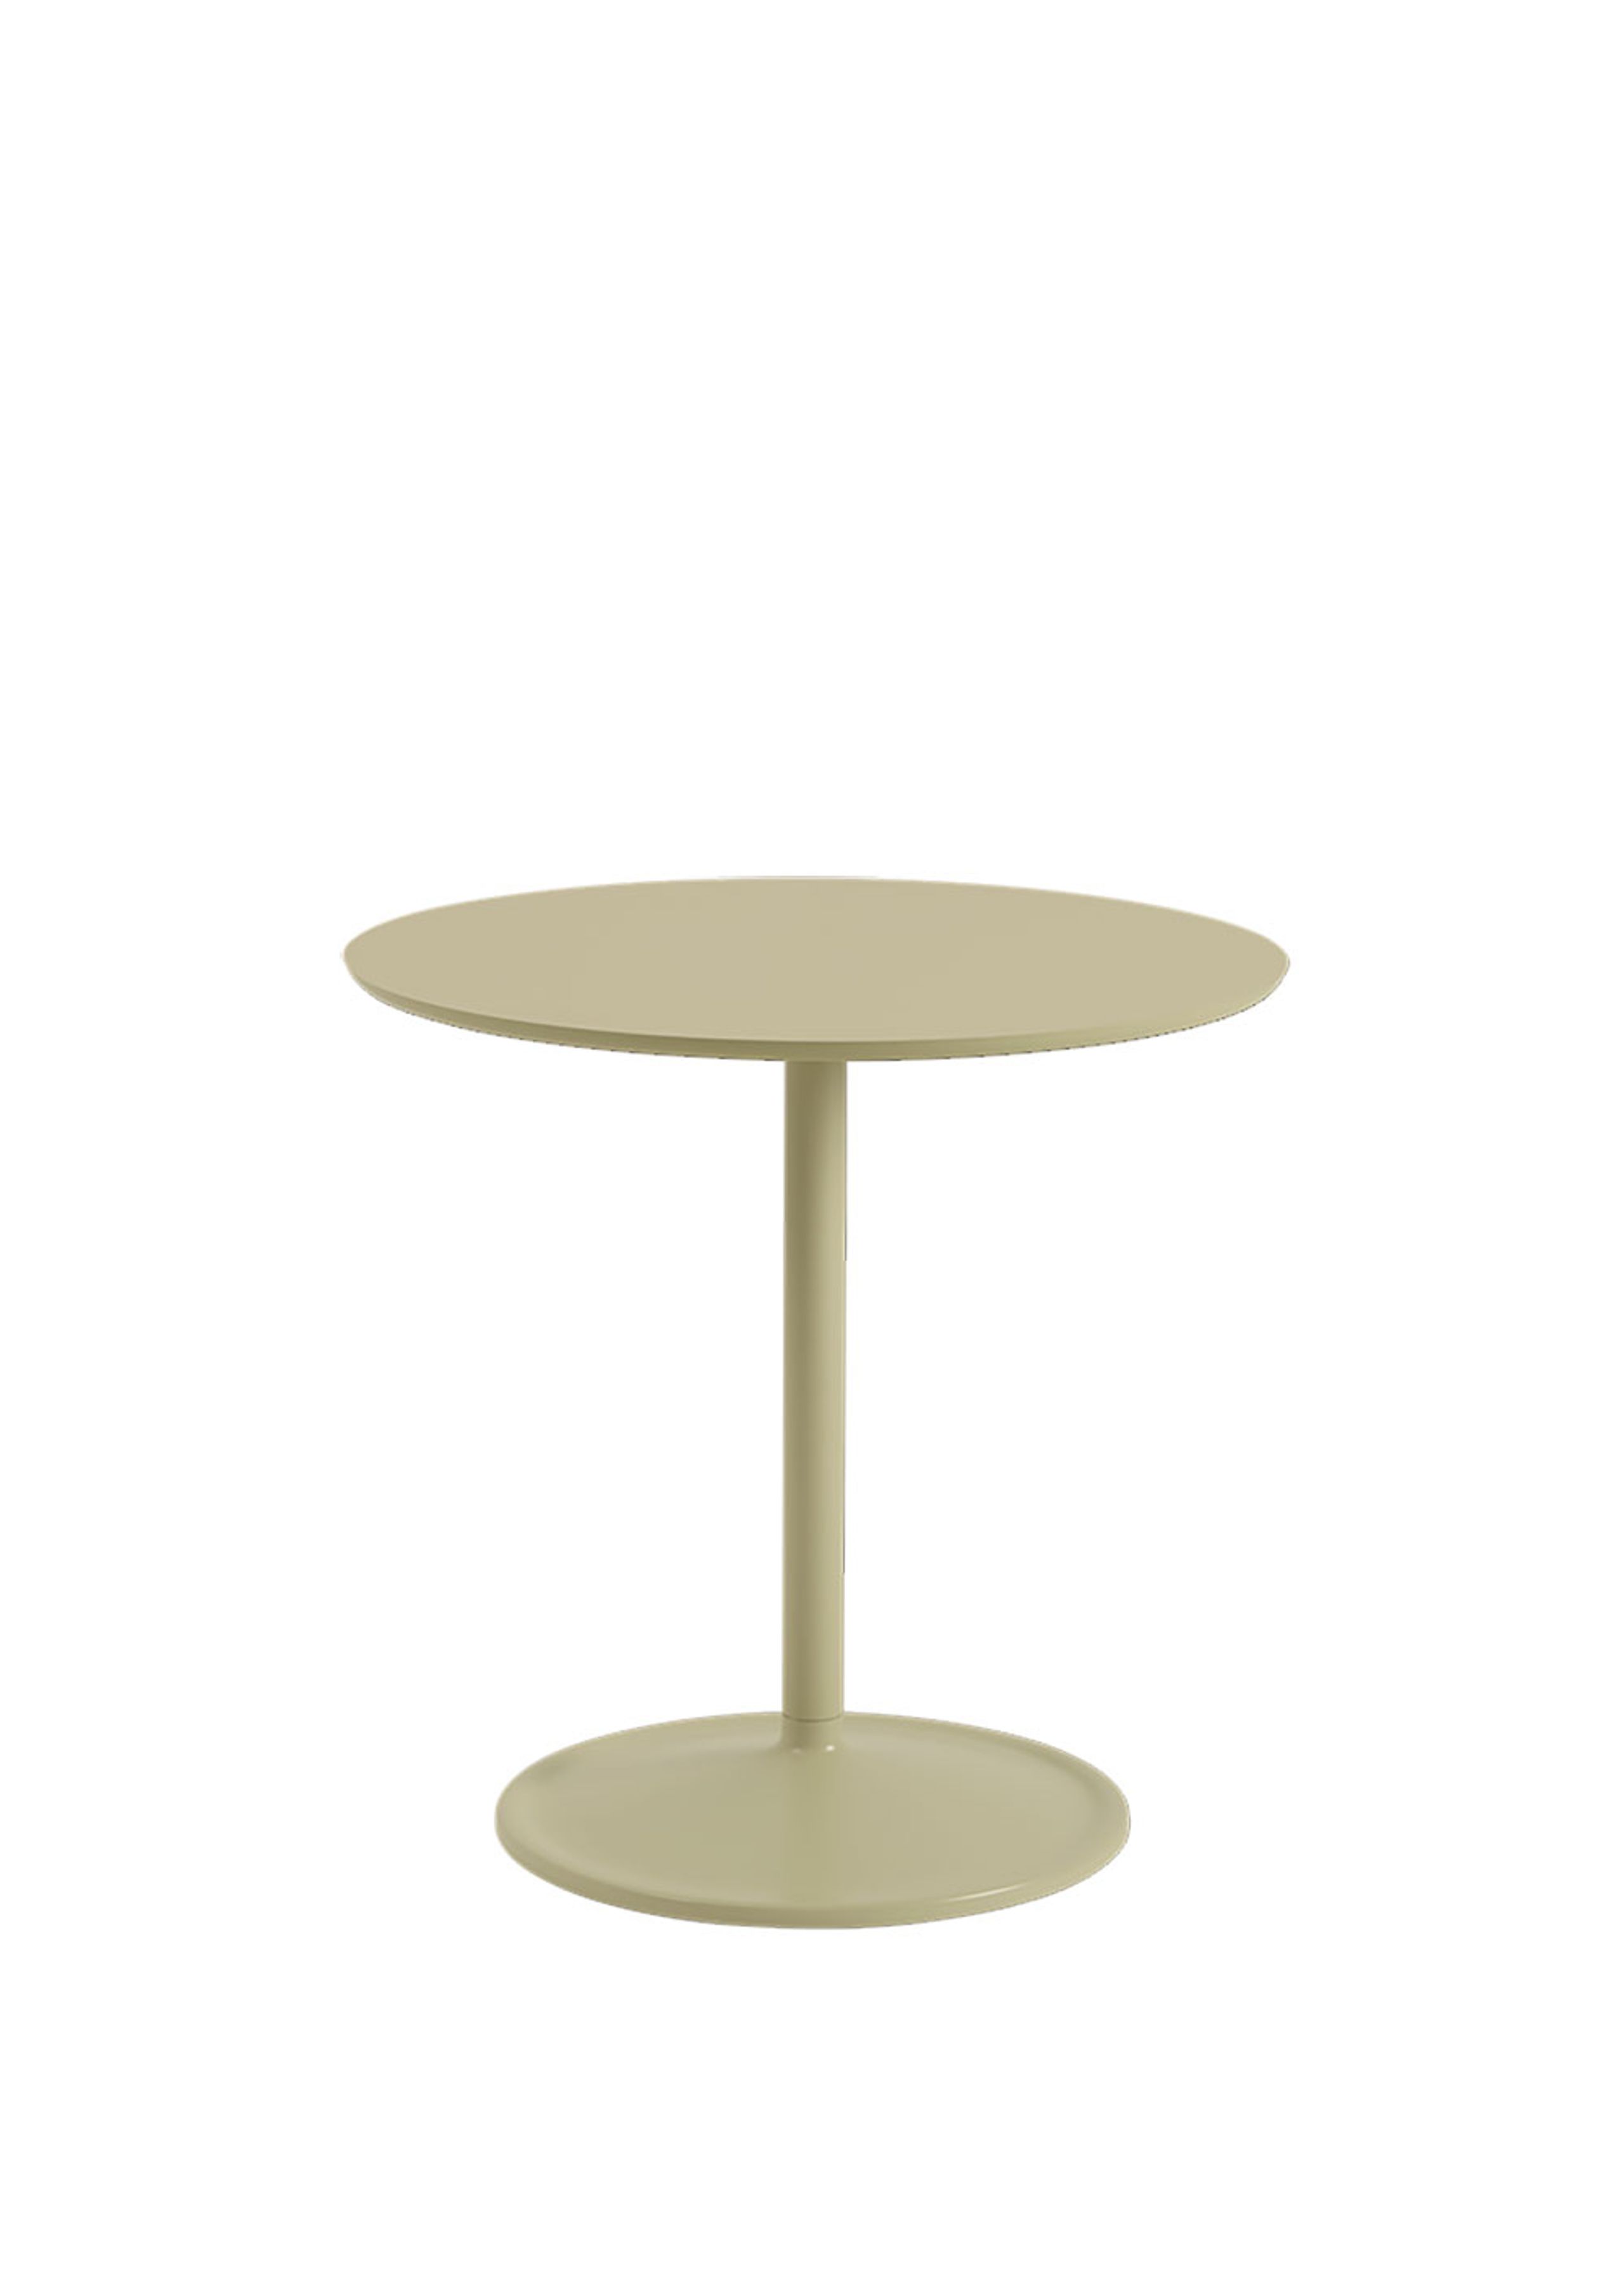 Muuto - Cafe-table - Soft Café Table - Beige Green Laminate/Beige Green